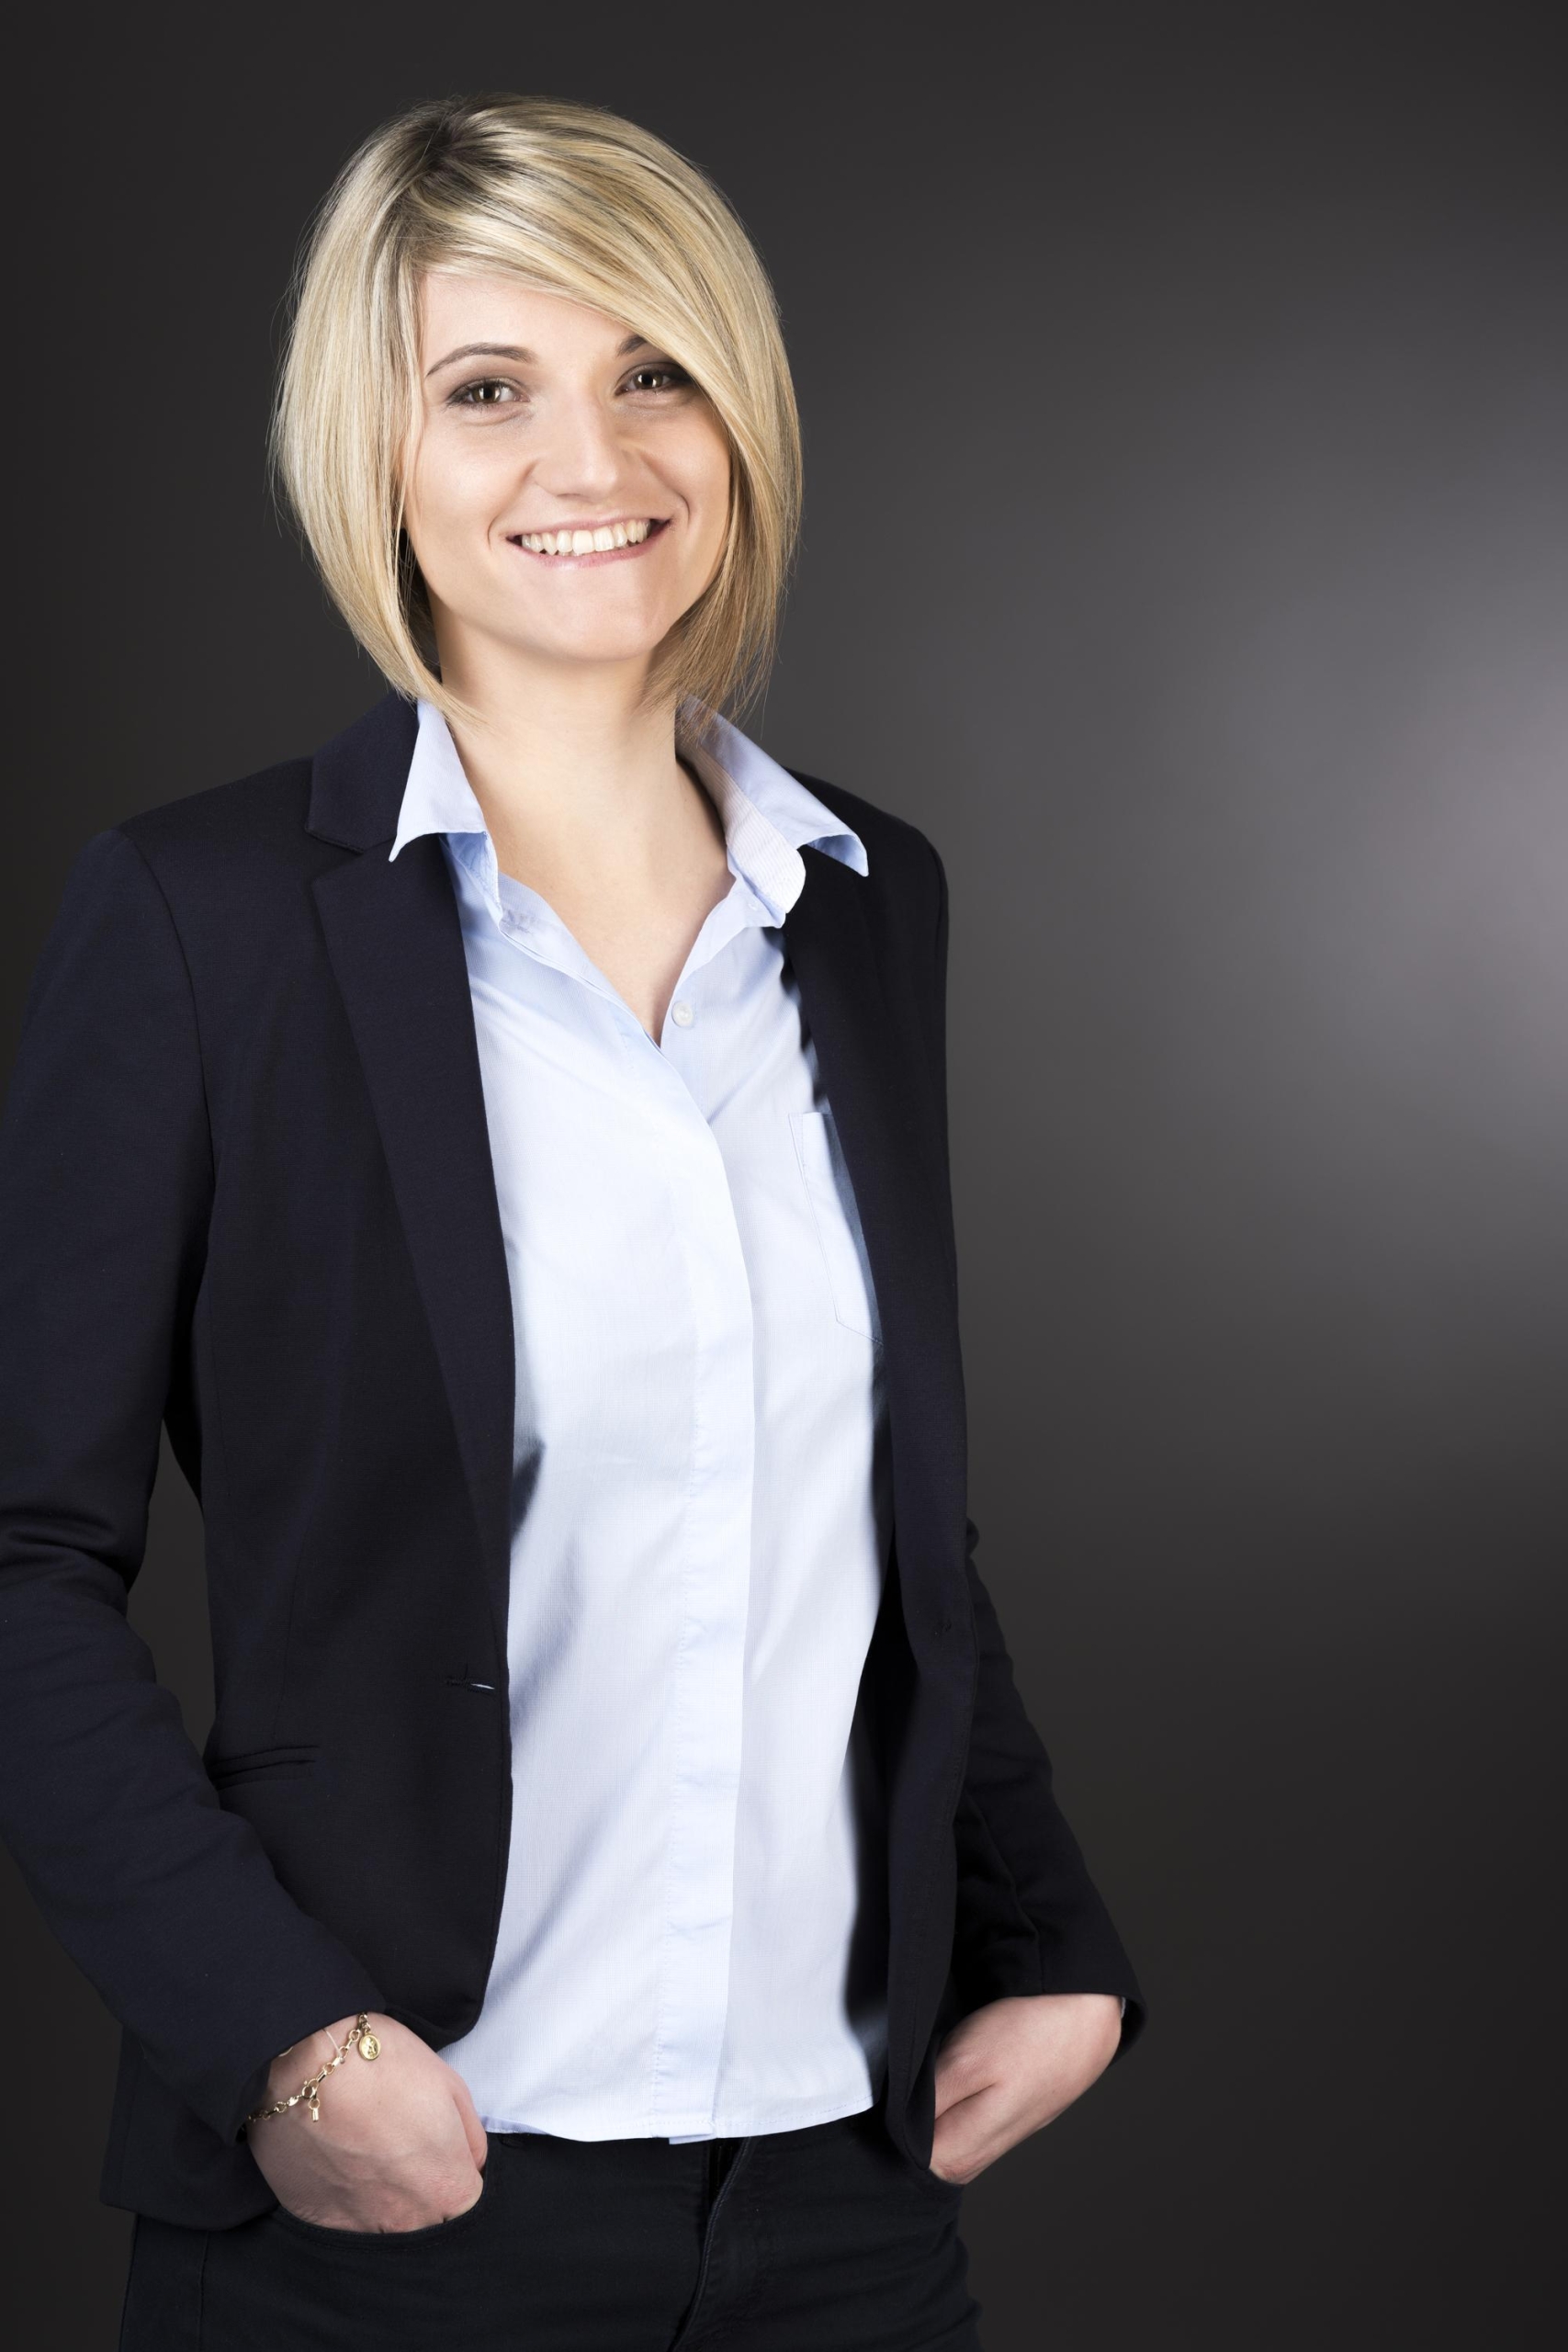 Christine Fasching, Head of Sales and Business Development at NEULANDT in a blazer and a blouse